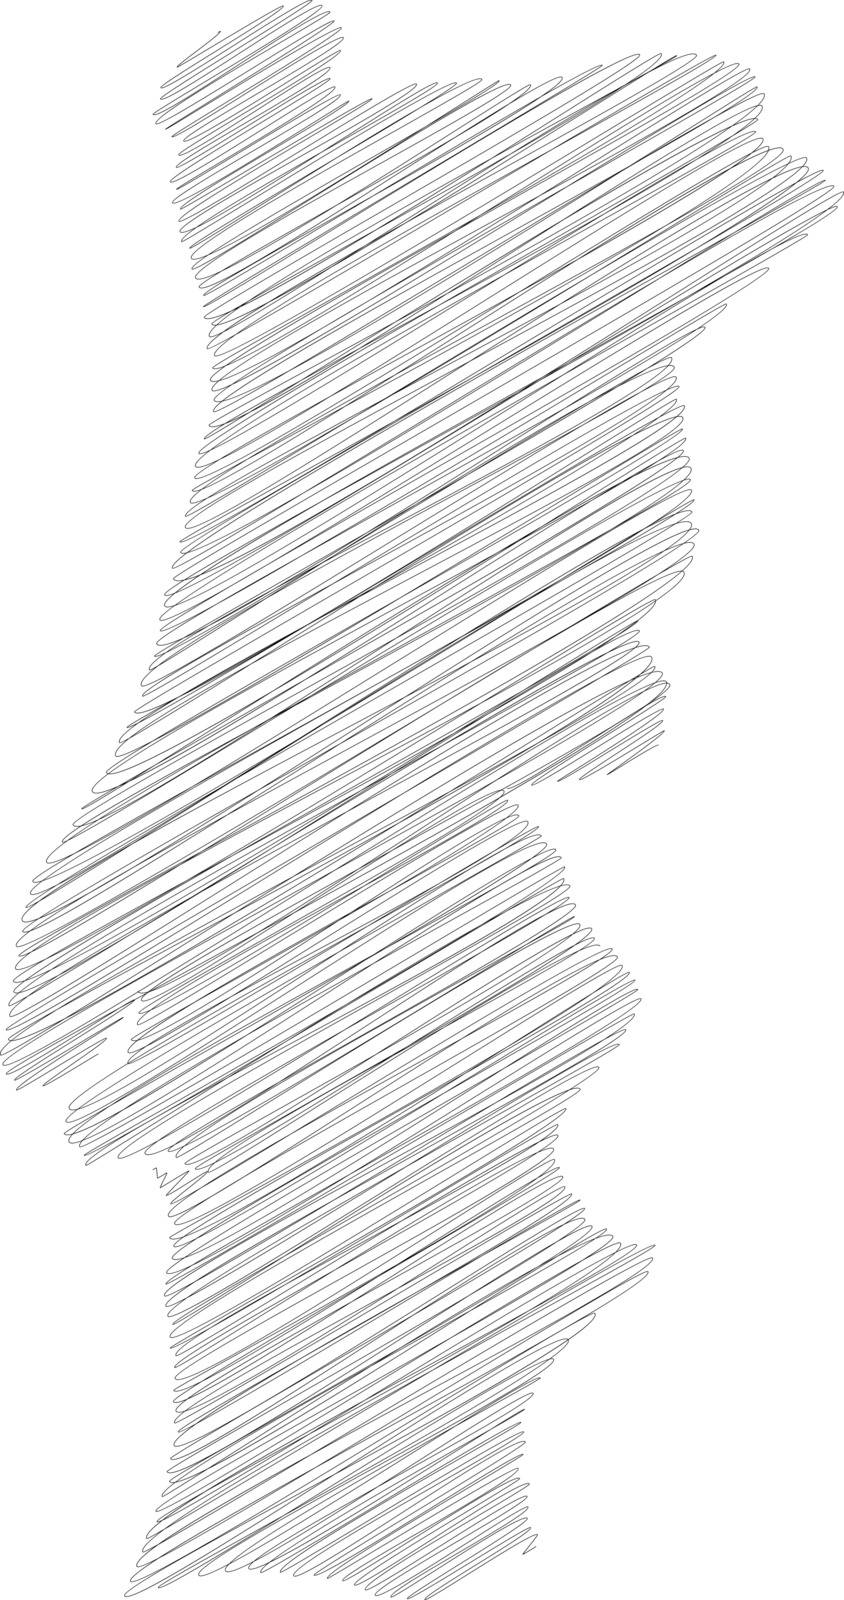 Portugal - pencil scribble sketch silhouette map of country area with dropped shadow. Simple flat vector illustration.